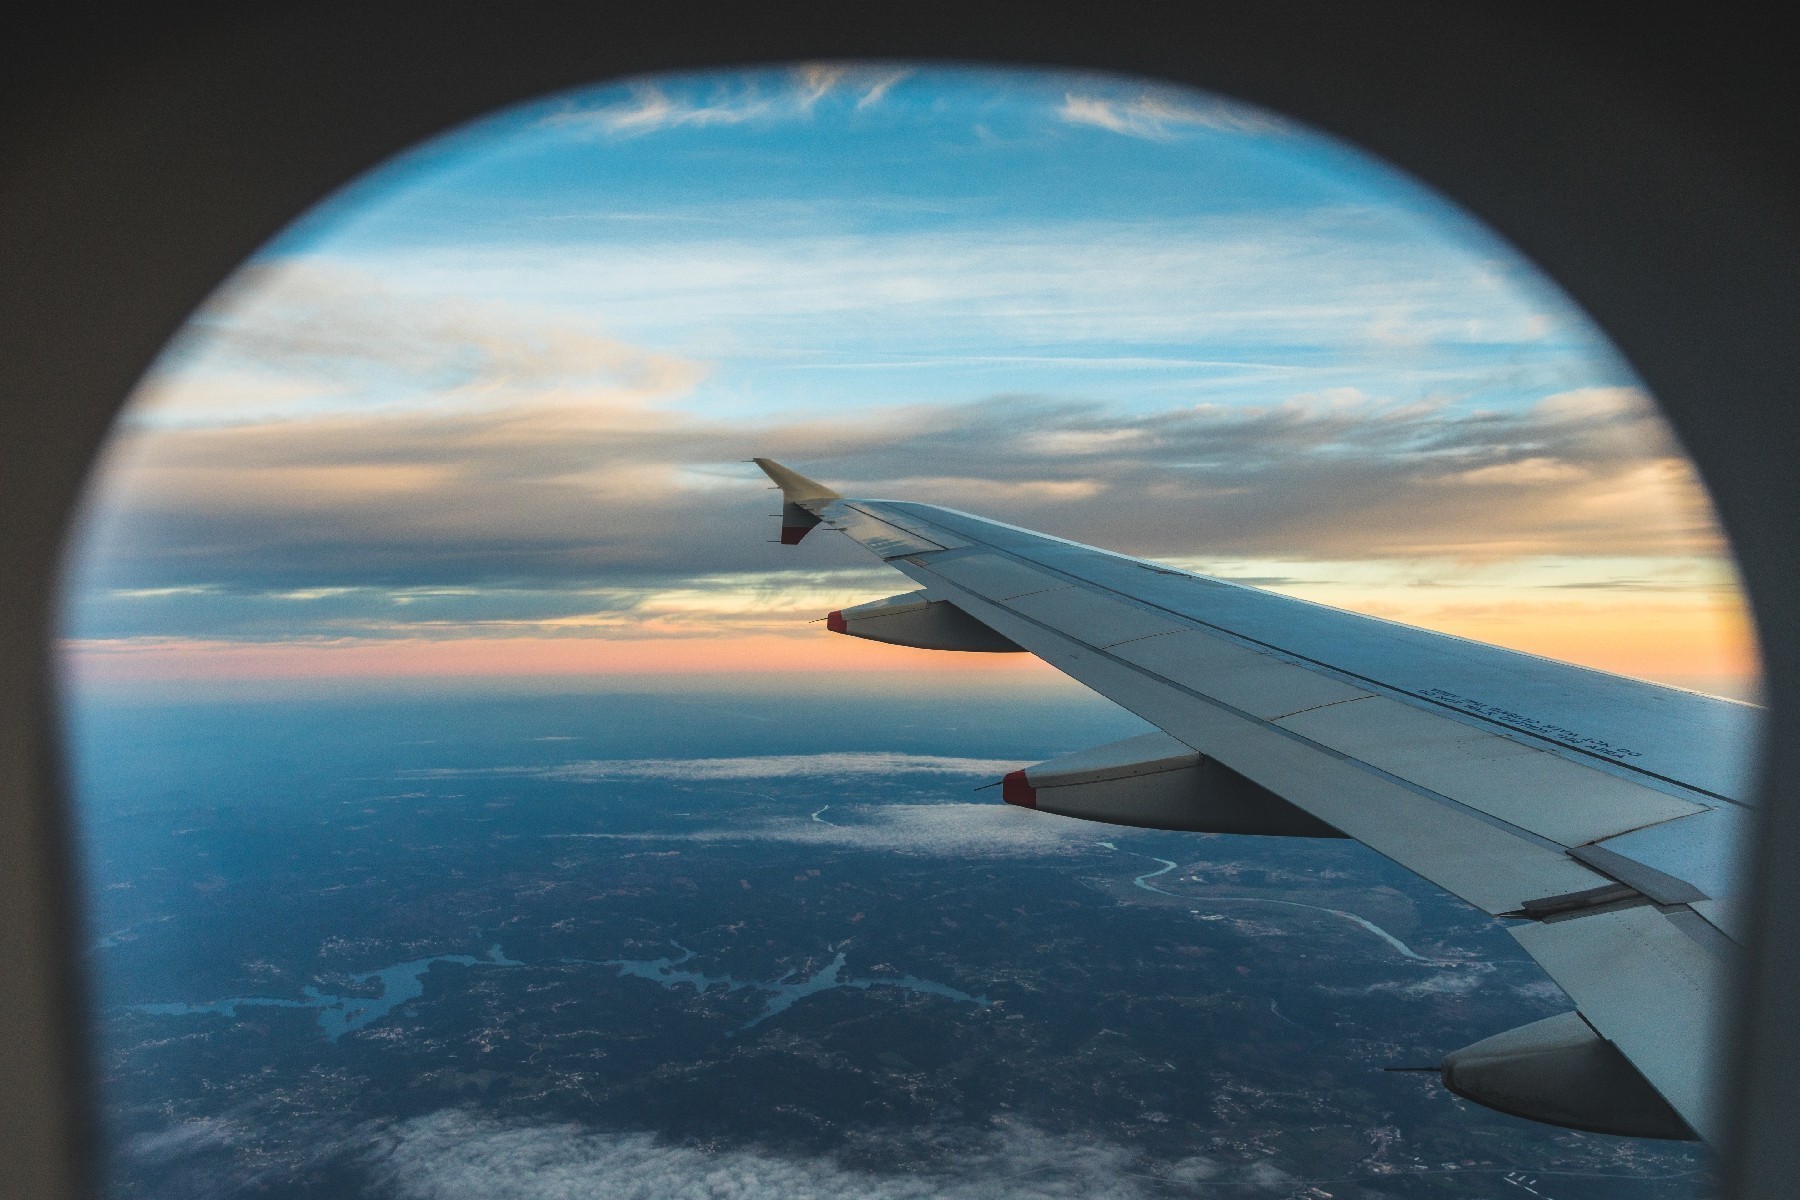 <p>If you are a nervous flyer and really don’t like turbulence, remember that an aircraft is like a seesaw: the ends move more than the middle (and since the air streams from front to back, the back of the plane is worse than the front). <a href="https://www.tripsavvy.com/secrets-your-pilots-know-54507" rel="noreferrer noopener">So, the least bumpy part of the plane is in the middle, over the wings.</a></p>